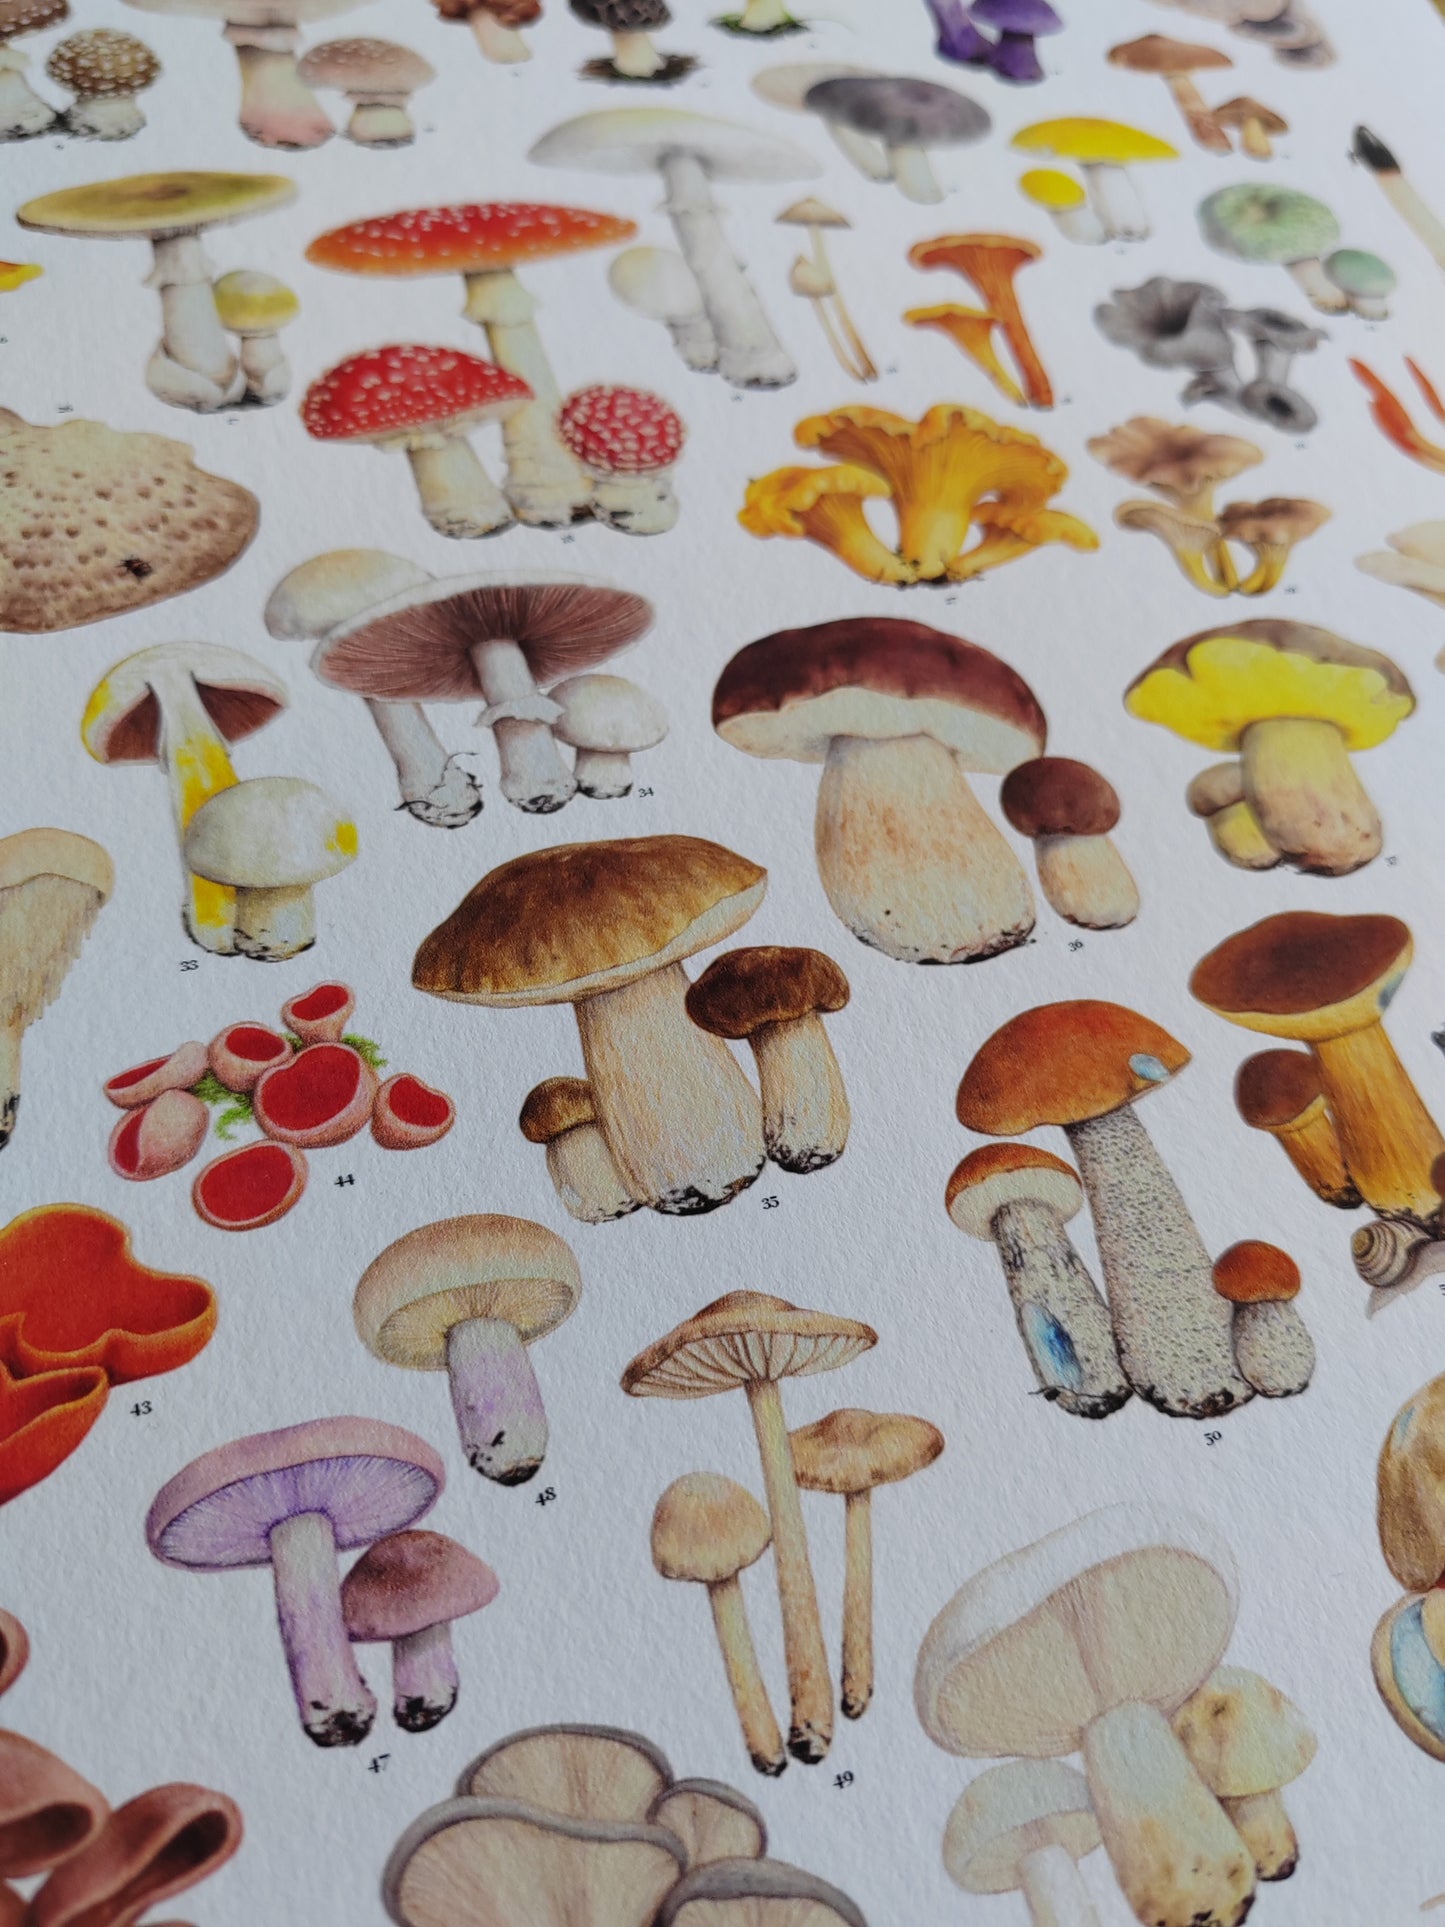 Essential Fungi A3 size Limited edition art print with Key to species